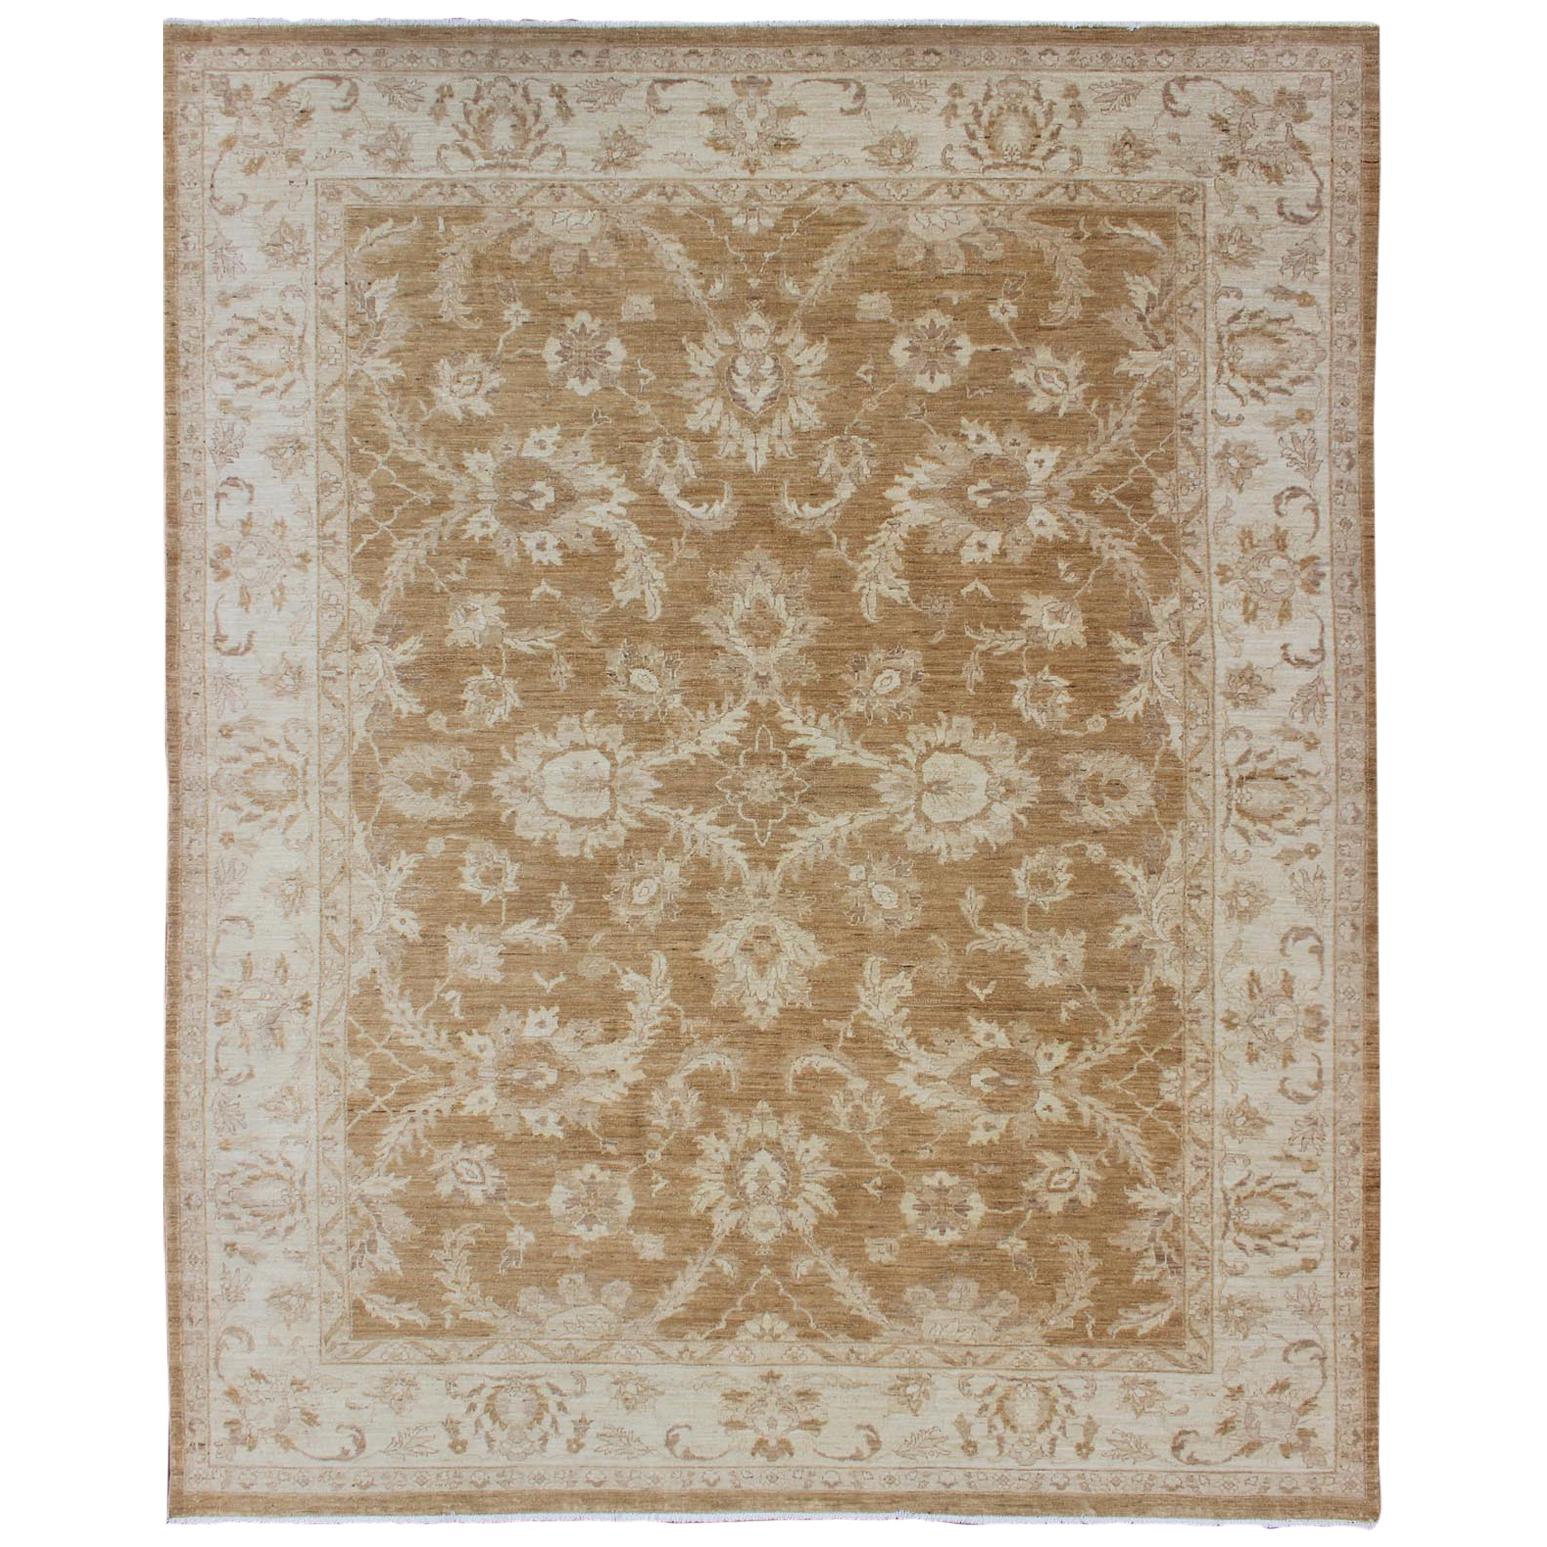 Sultanabad Design Afghan Made Floral Pattern in Earth Tones with Light Caramel For Sale